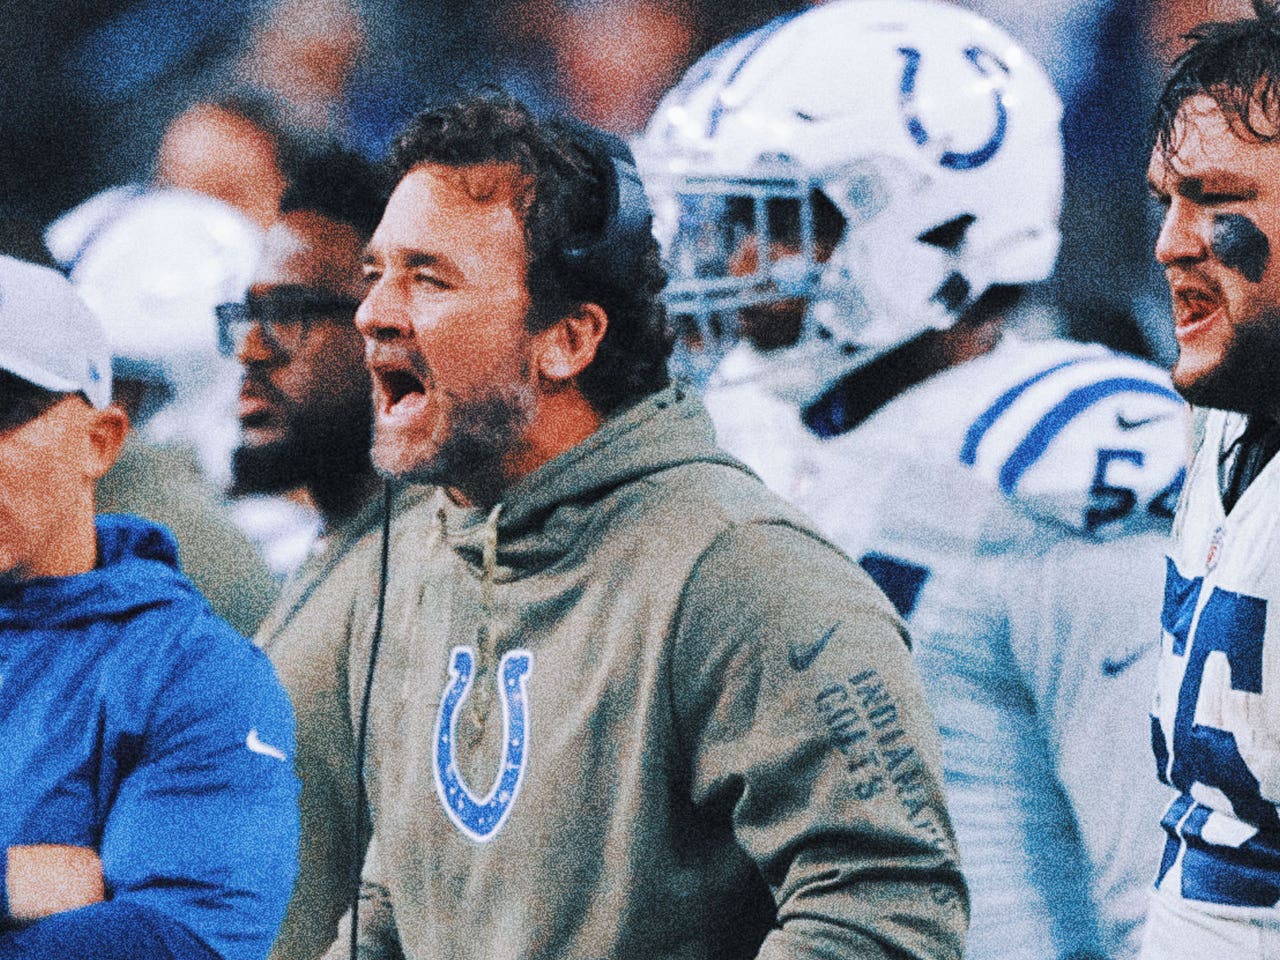 Colts coach Jeff Saturday wants to drop interim tag. Does he